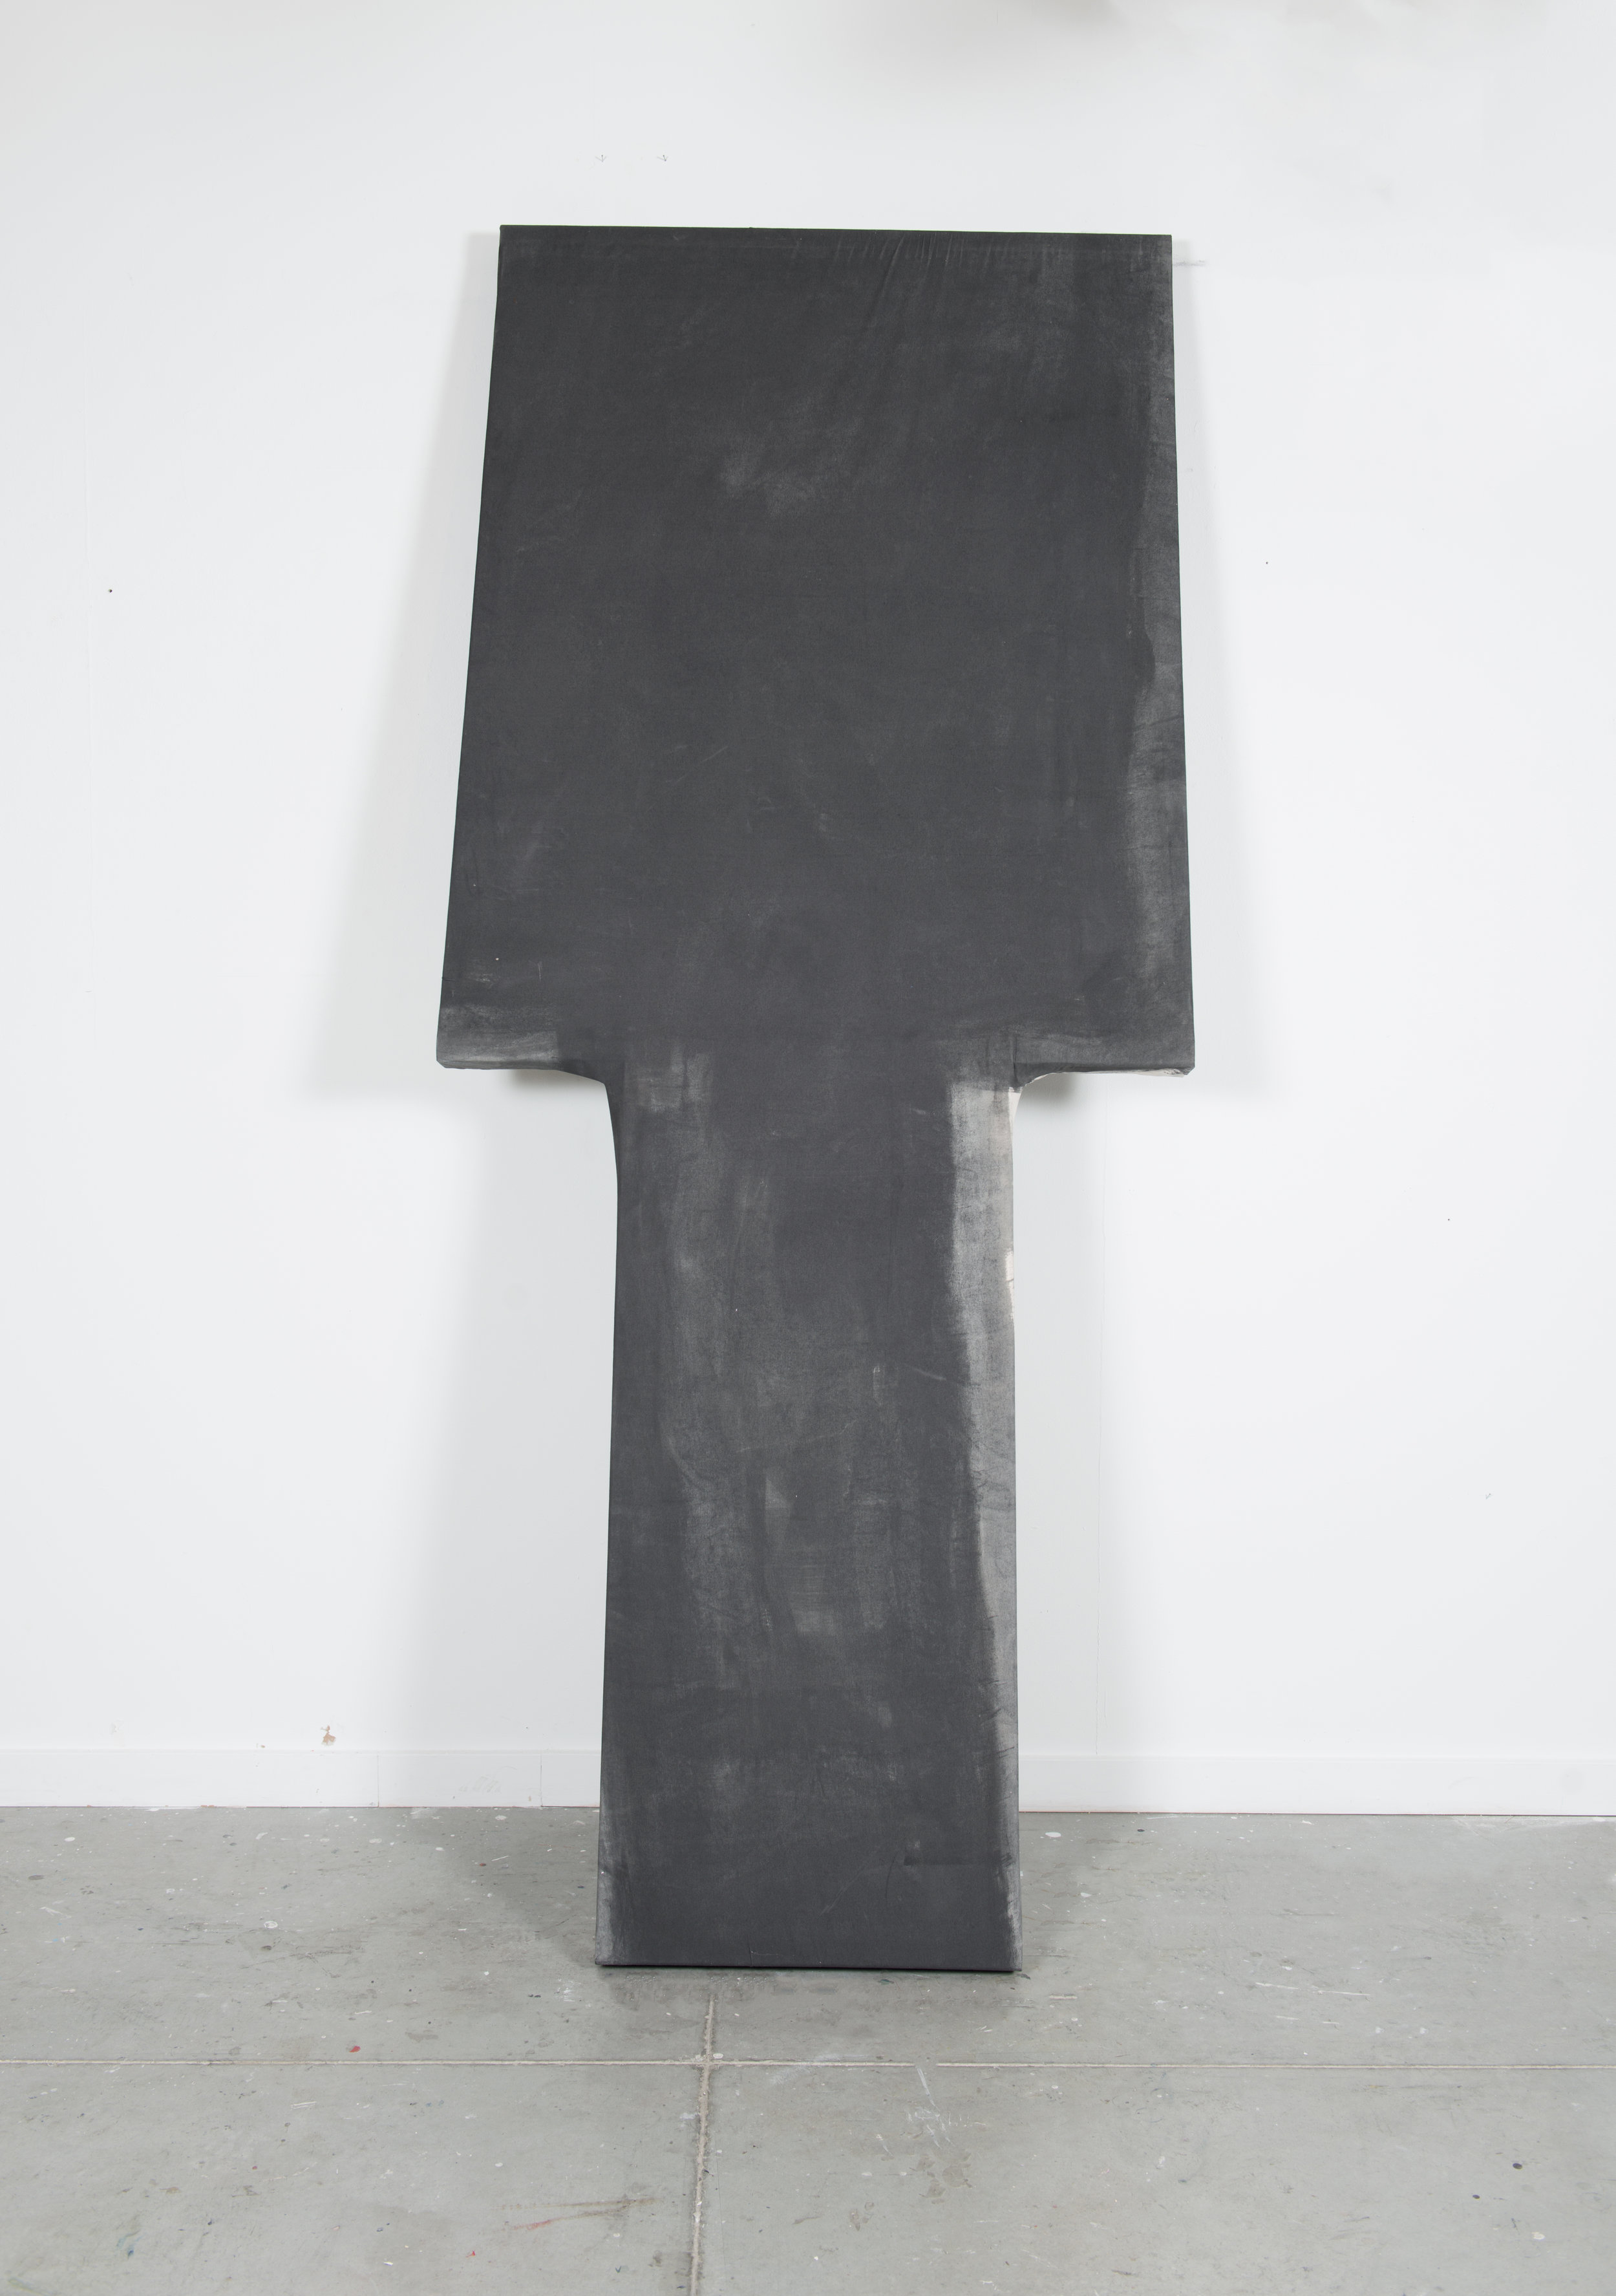   She Lives Alone, In Her House,  2016, Graphite, muslin, wood, 48" X 96" X 4" 